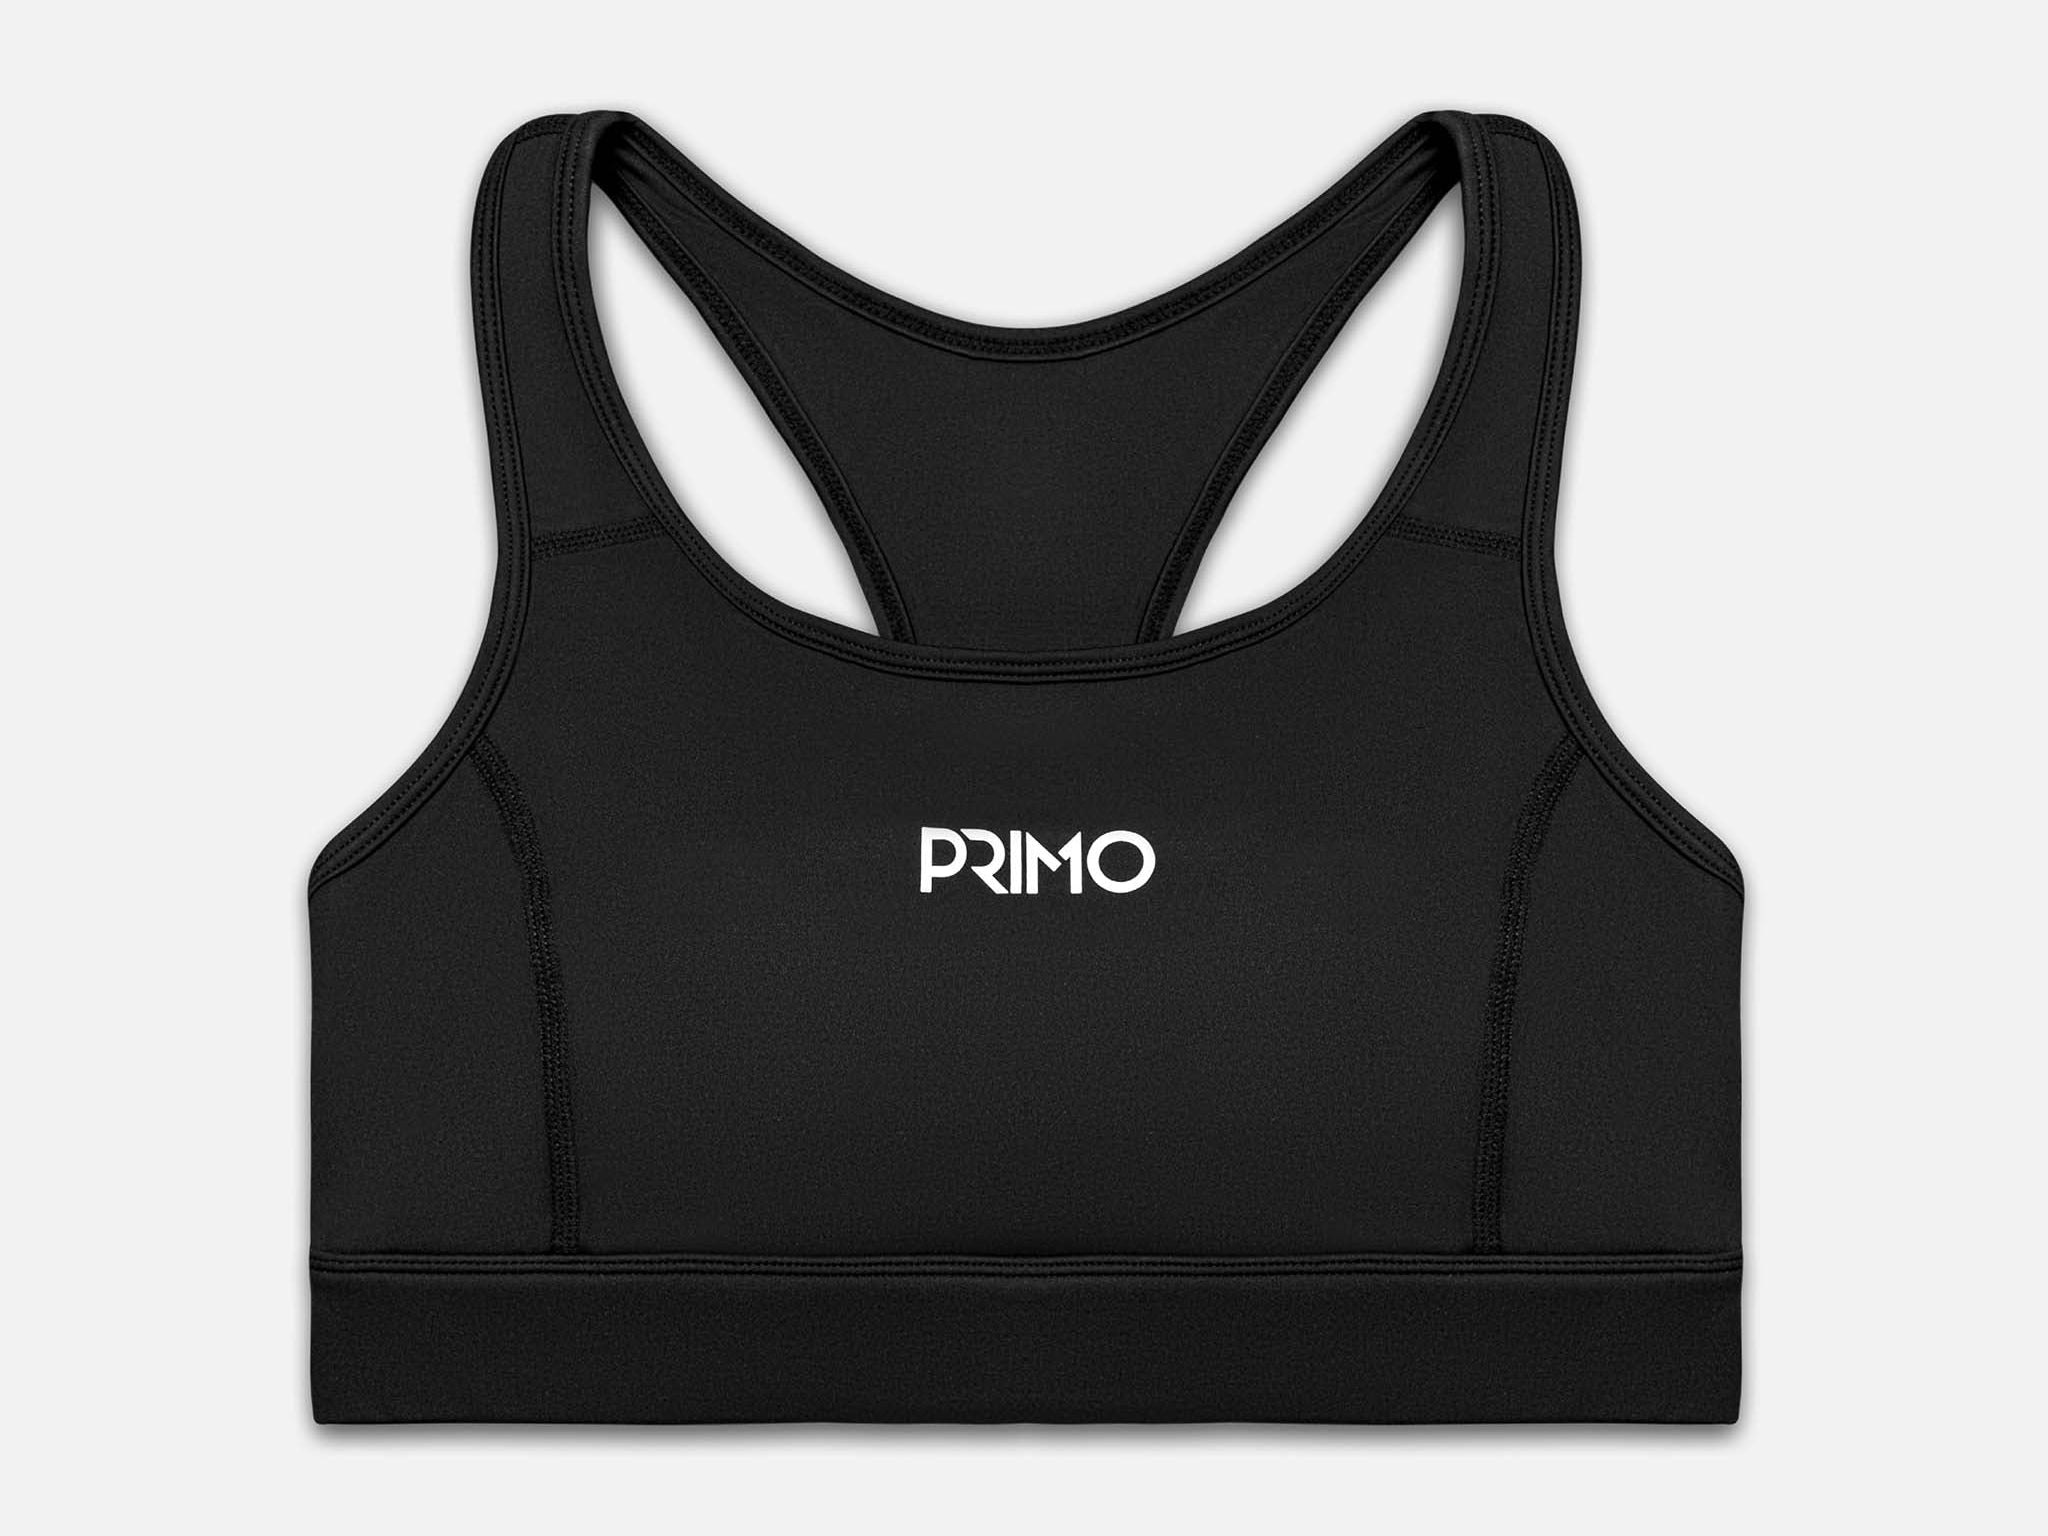 Primo Fight Wear Official Air Sports Bra - Black